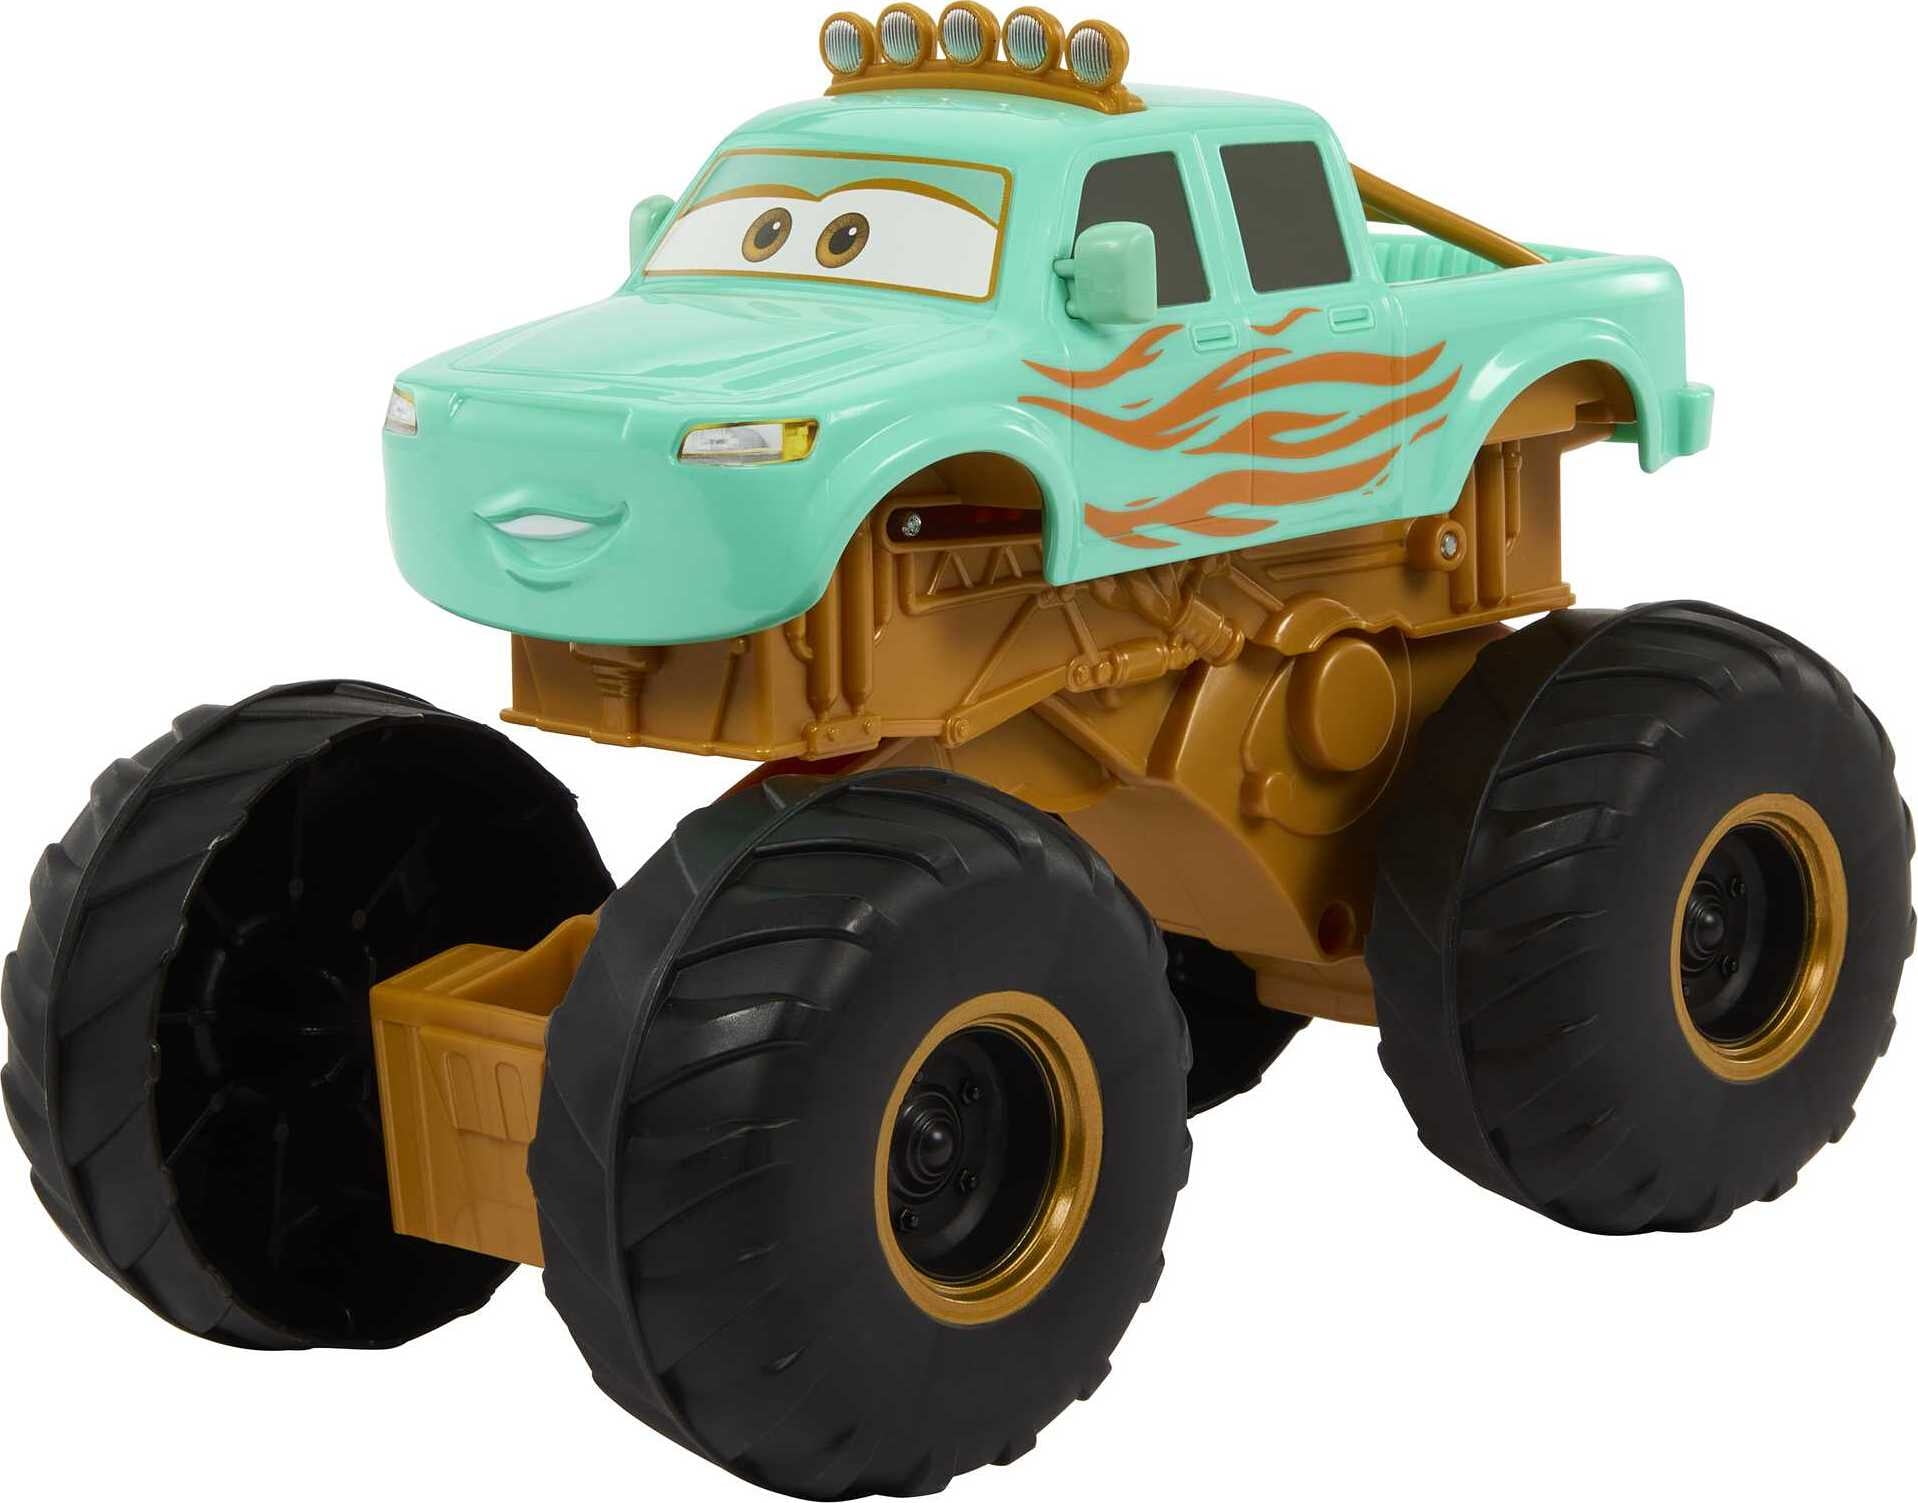 Disney and Pixar Cars On The Road Circus Stunt Ivy Toy Vehicle, Jumping Monster Truck